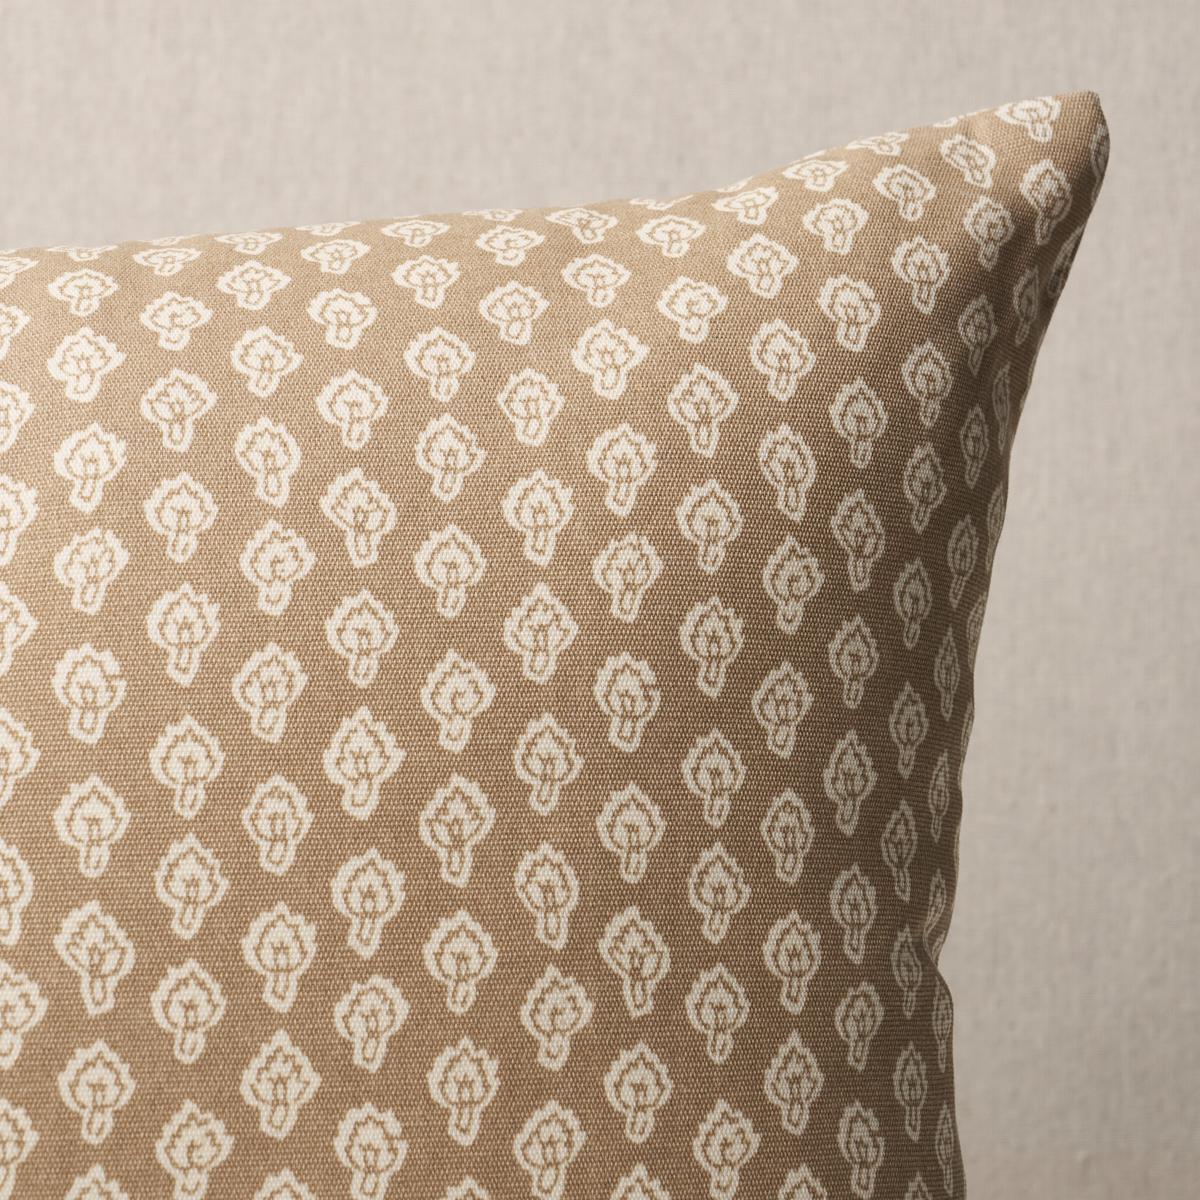 This pillow features Hyacinth Indoor/Outdoor by Mark D. Sikes with a knife edge finish. Inspired by traditional Indian block prints, Hyacinth Indoor/Outdoor in leaf green by Mark D. Sikes is a stylish high-performance fabric that can stand up to the